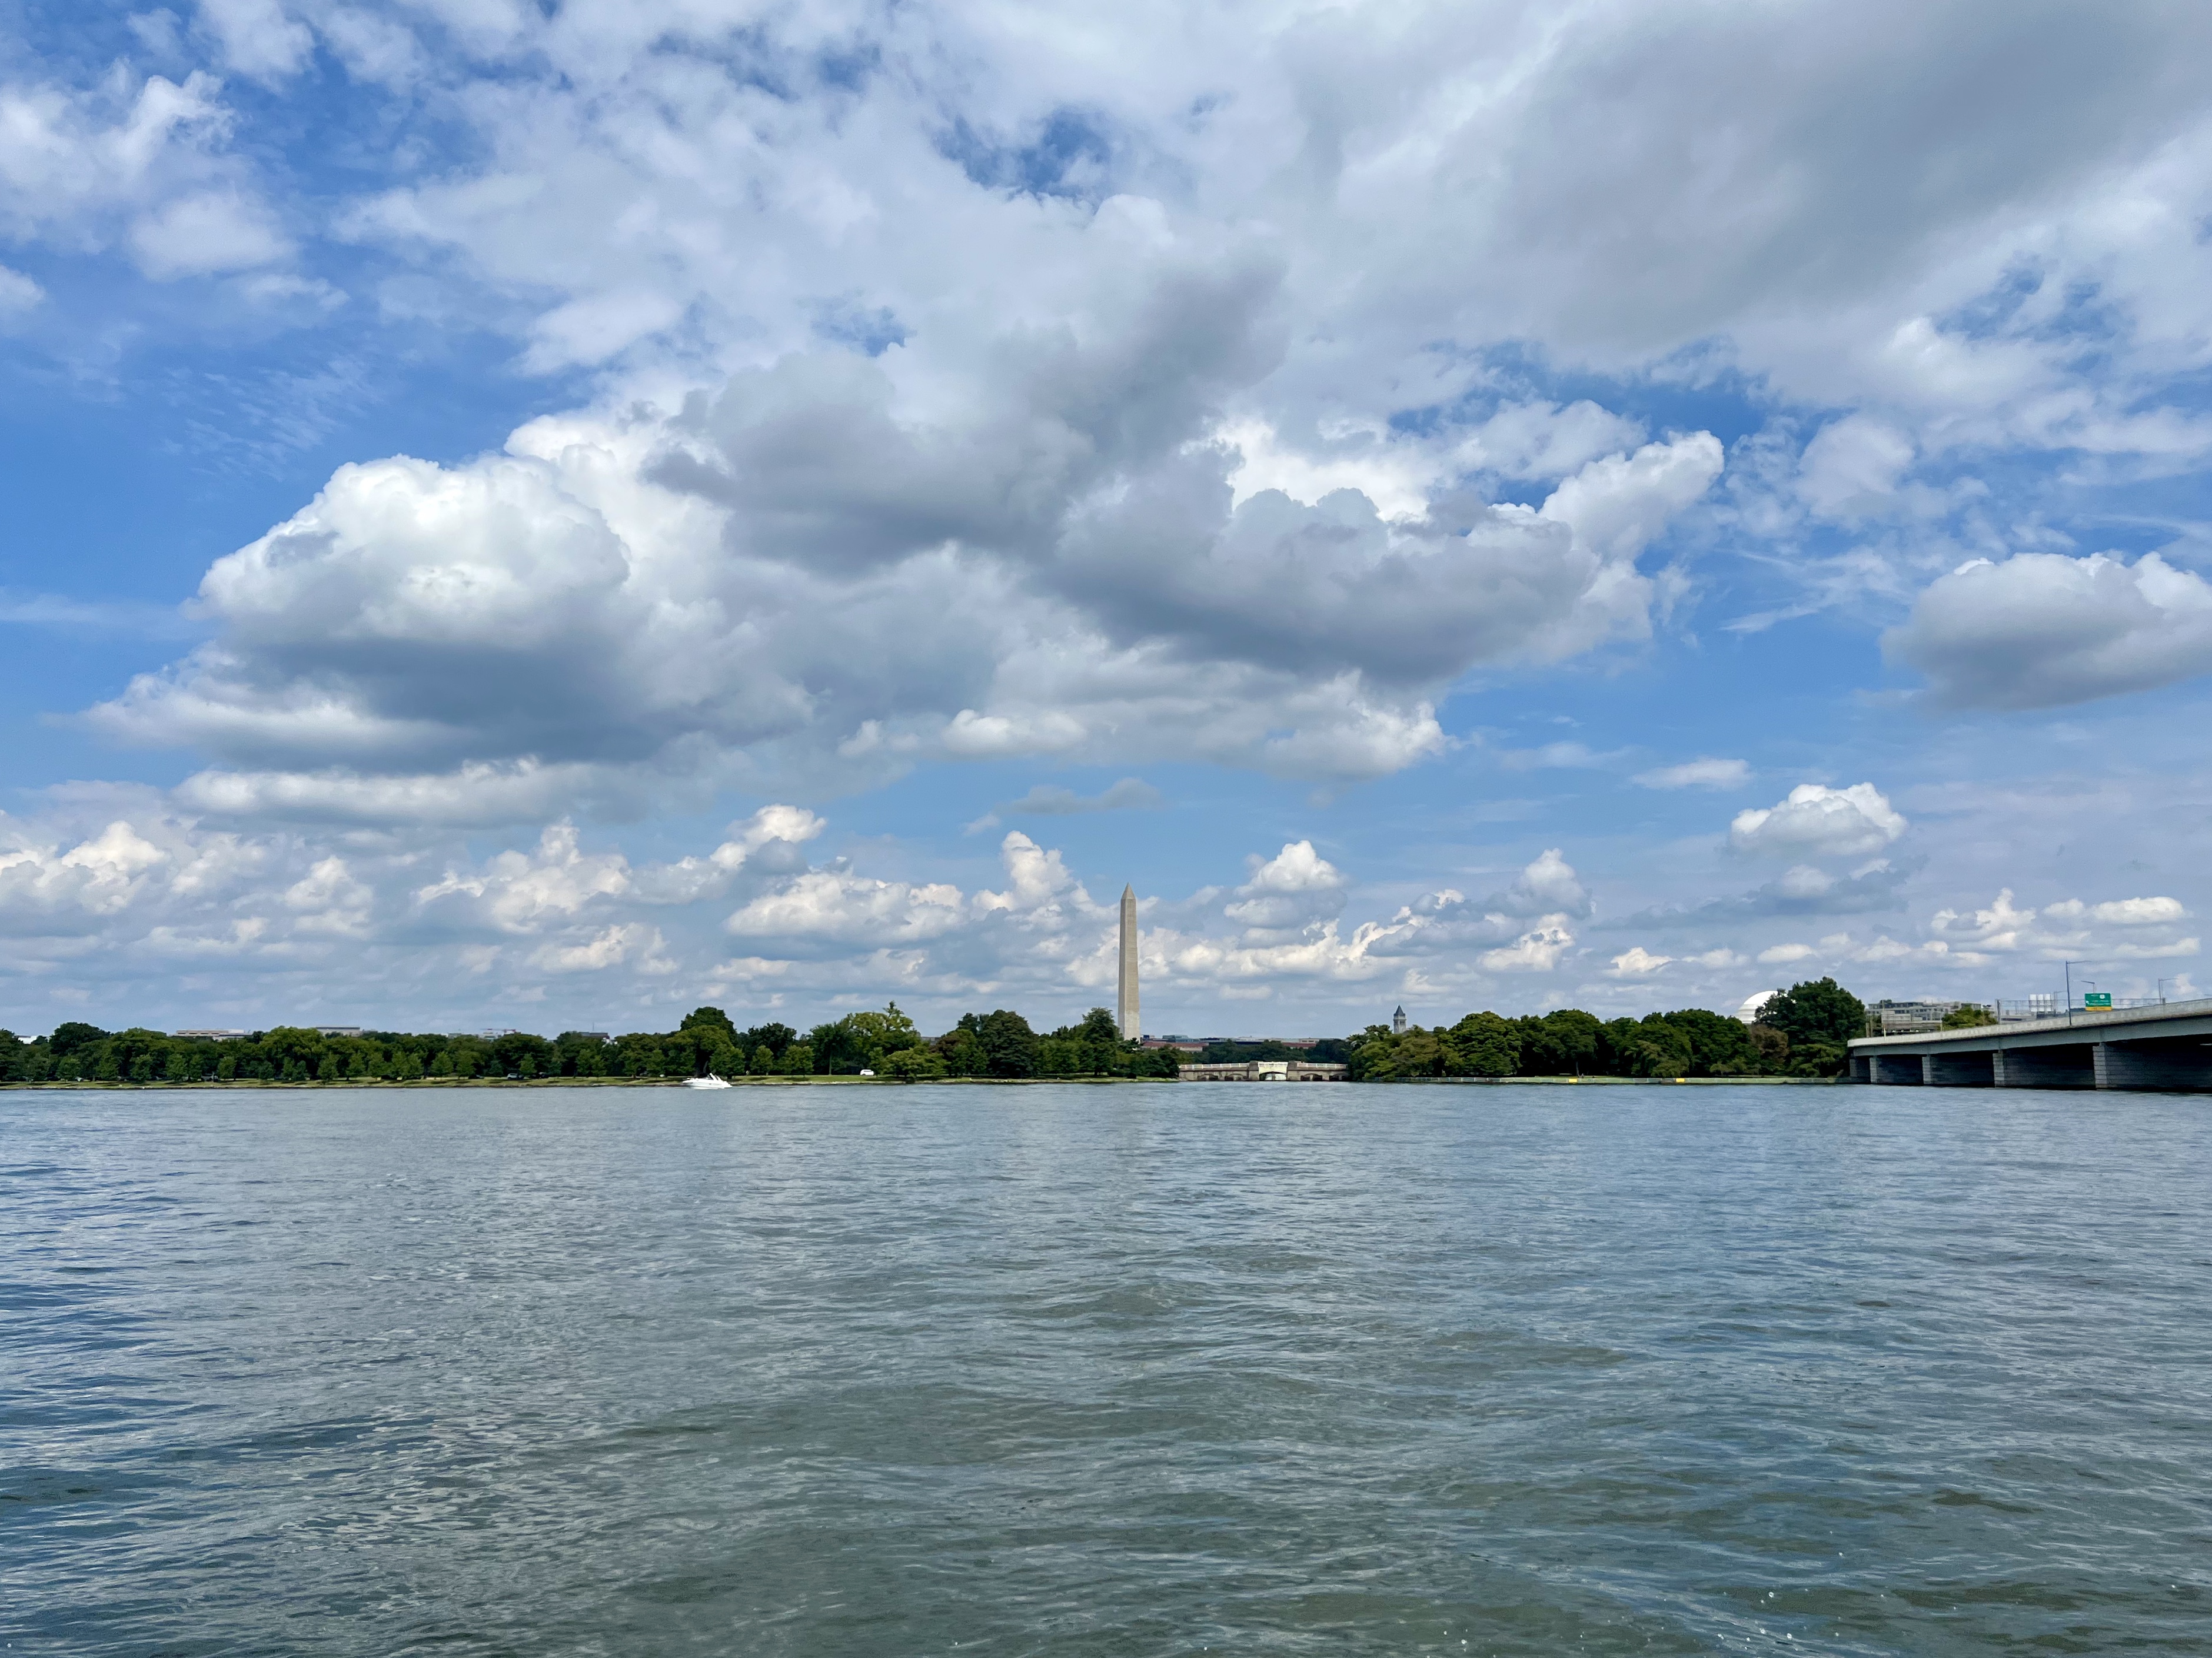 washington dc, boat day, washington dc travel guide, washington monuments by boat, 72 hours in DC, labor day weekend